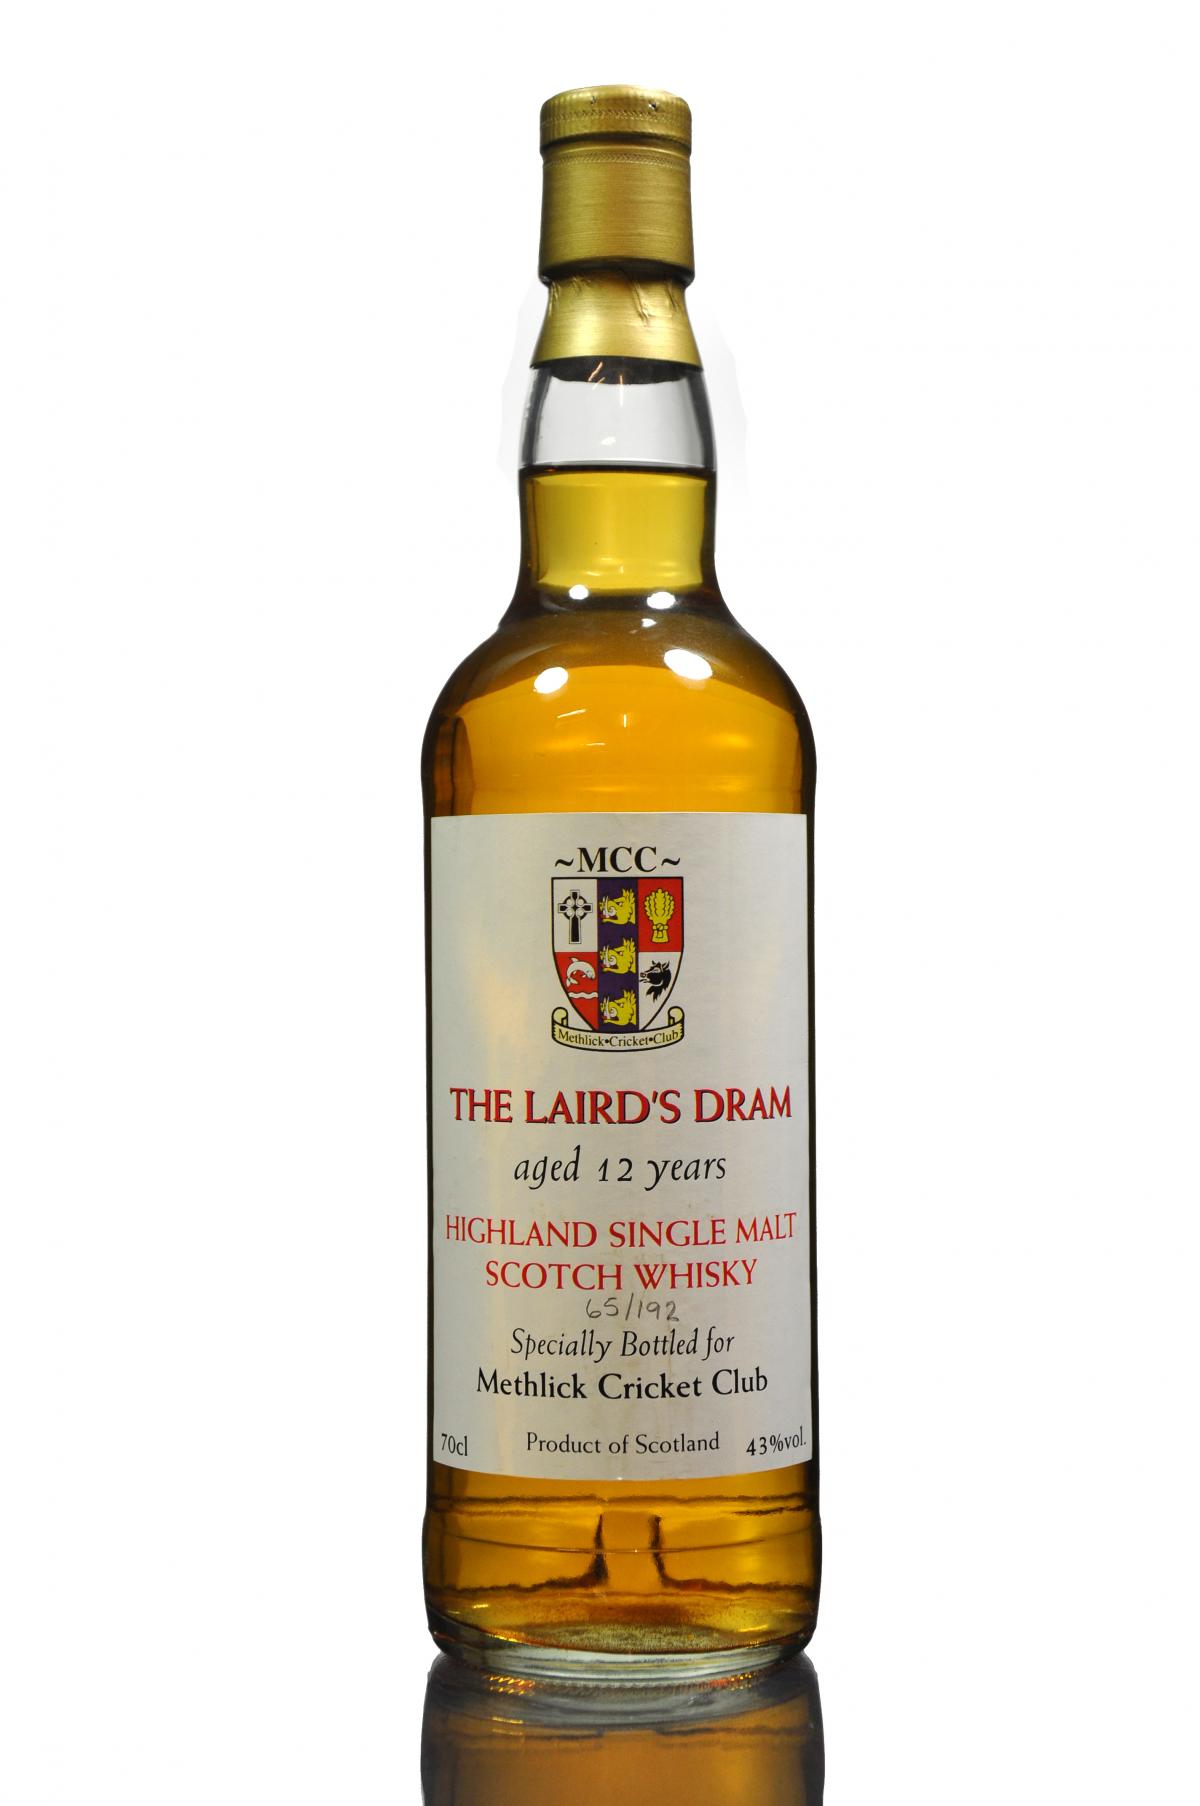 The Lairds Dram 12 Year Old